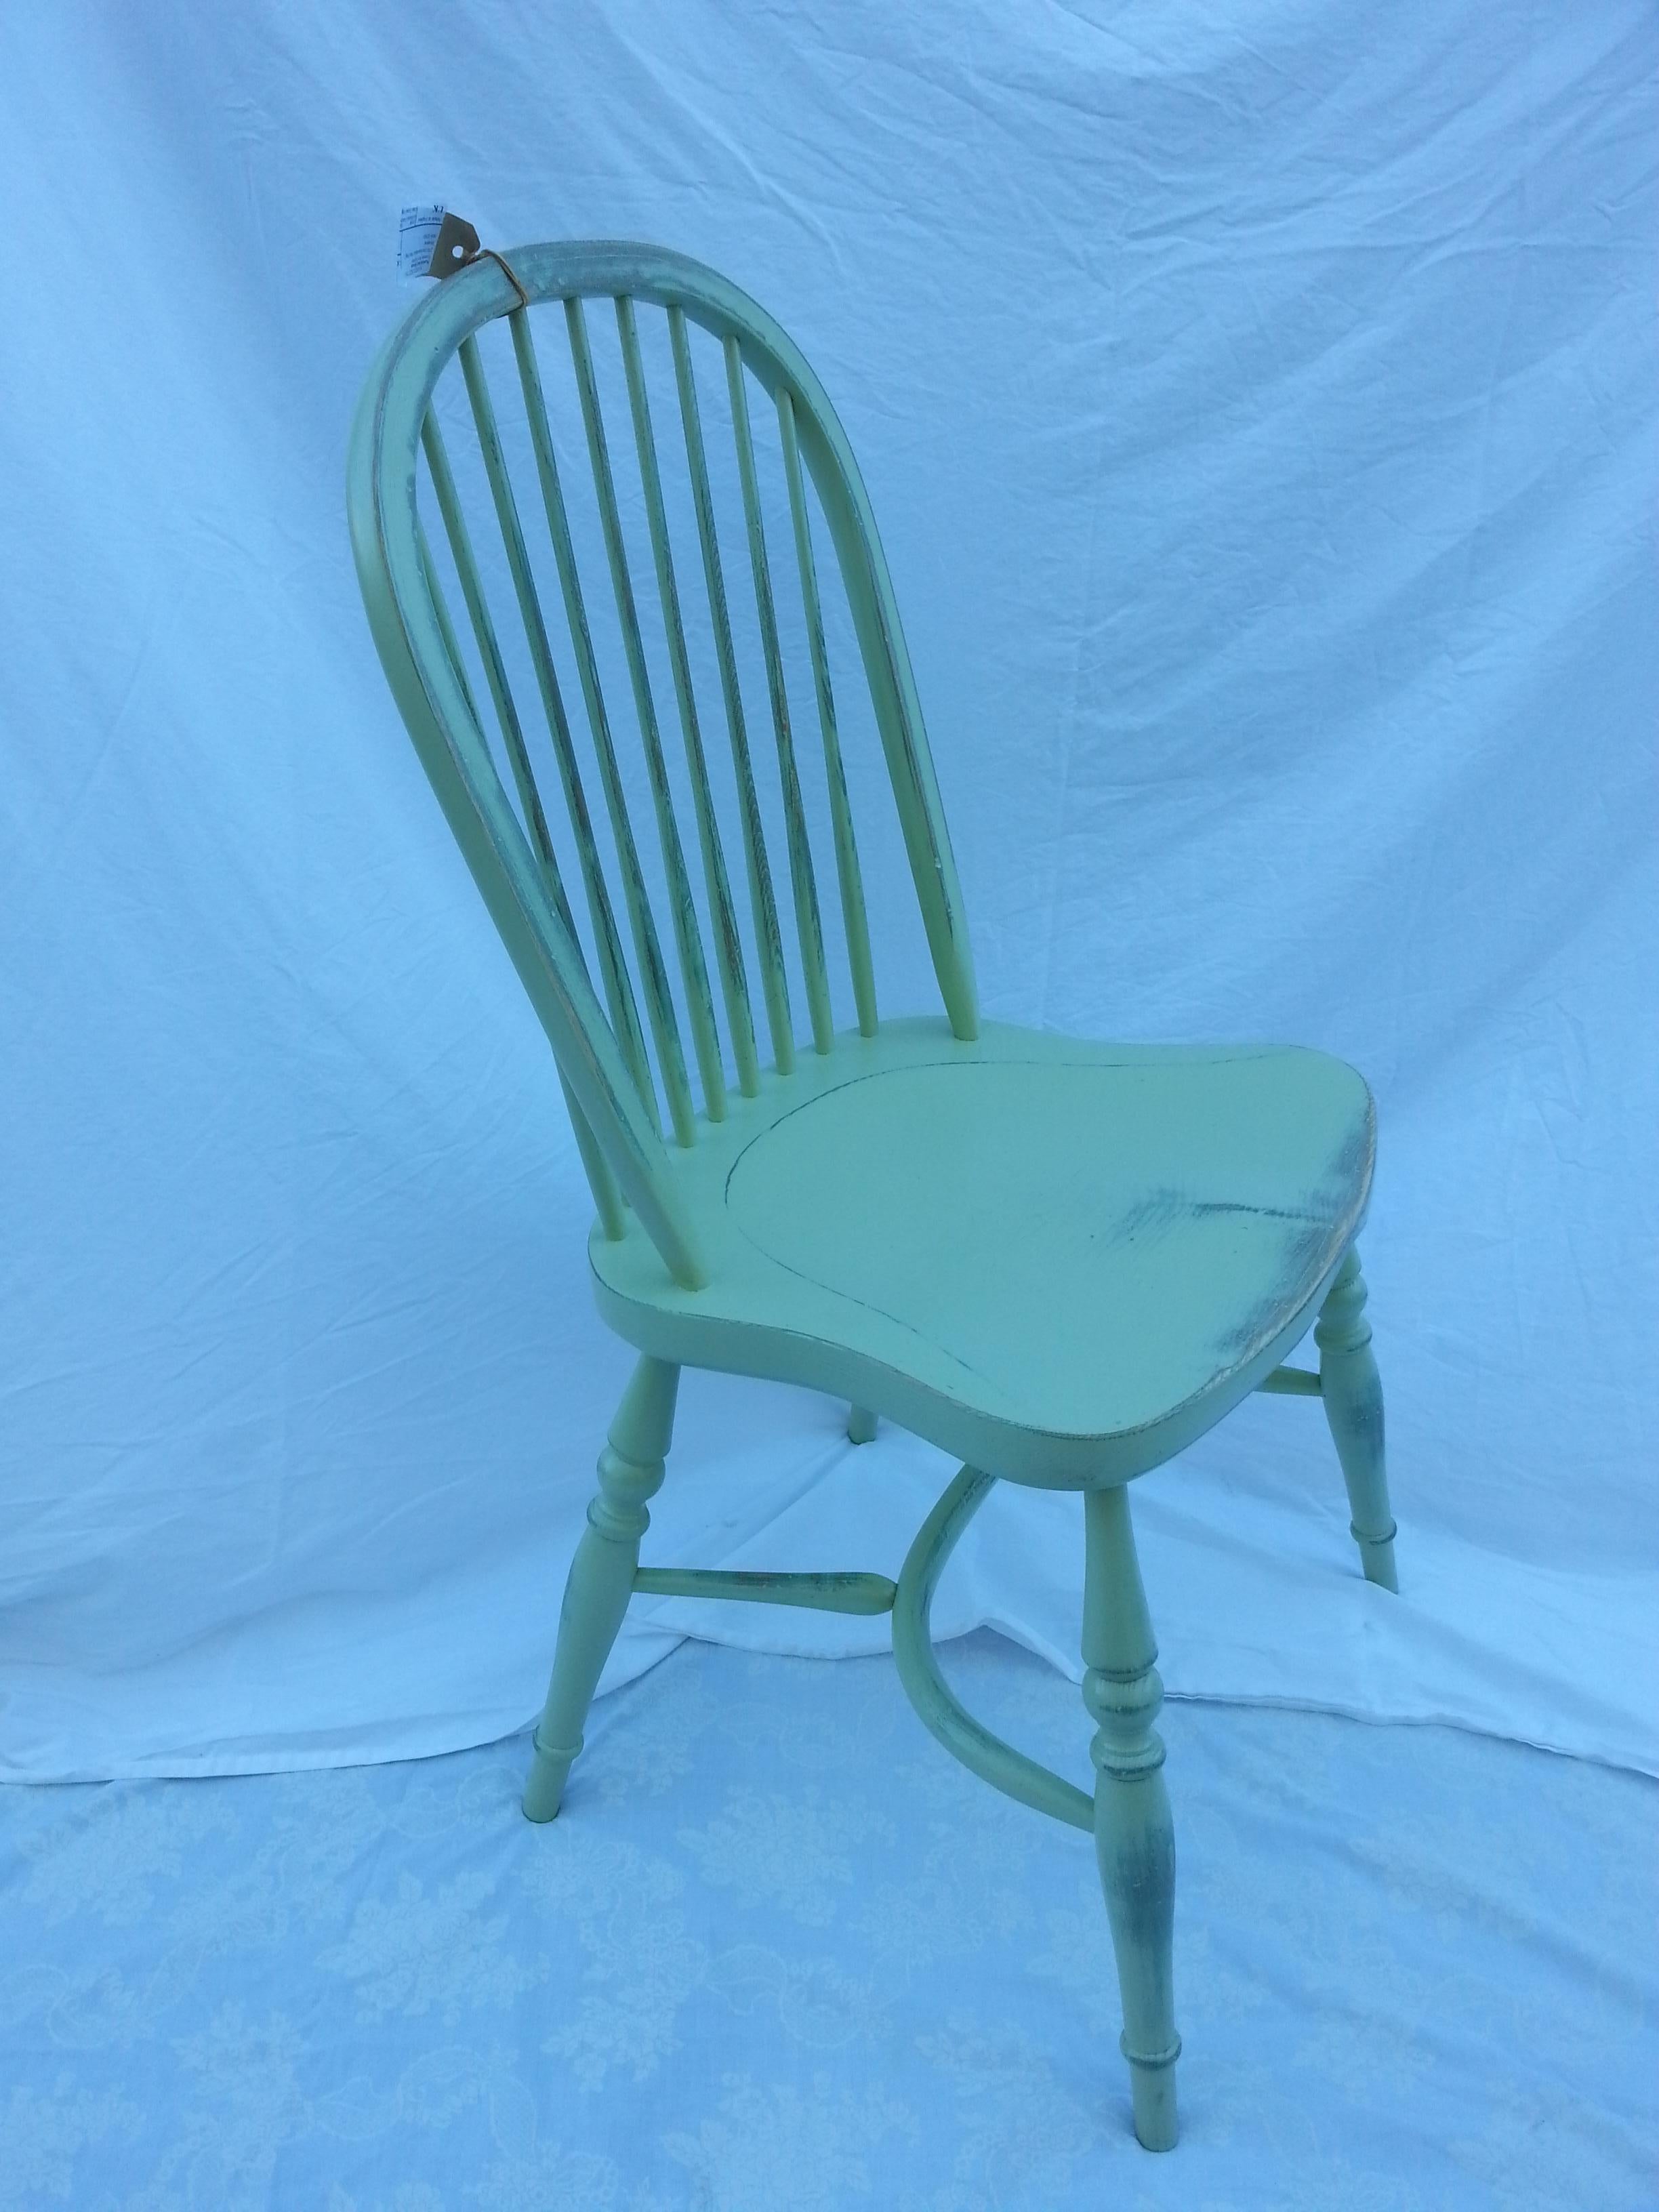 Reproduction spindle back light green side chair with blue underneath.